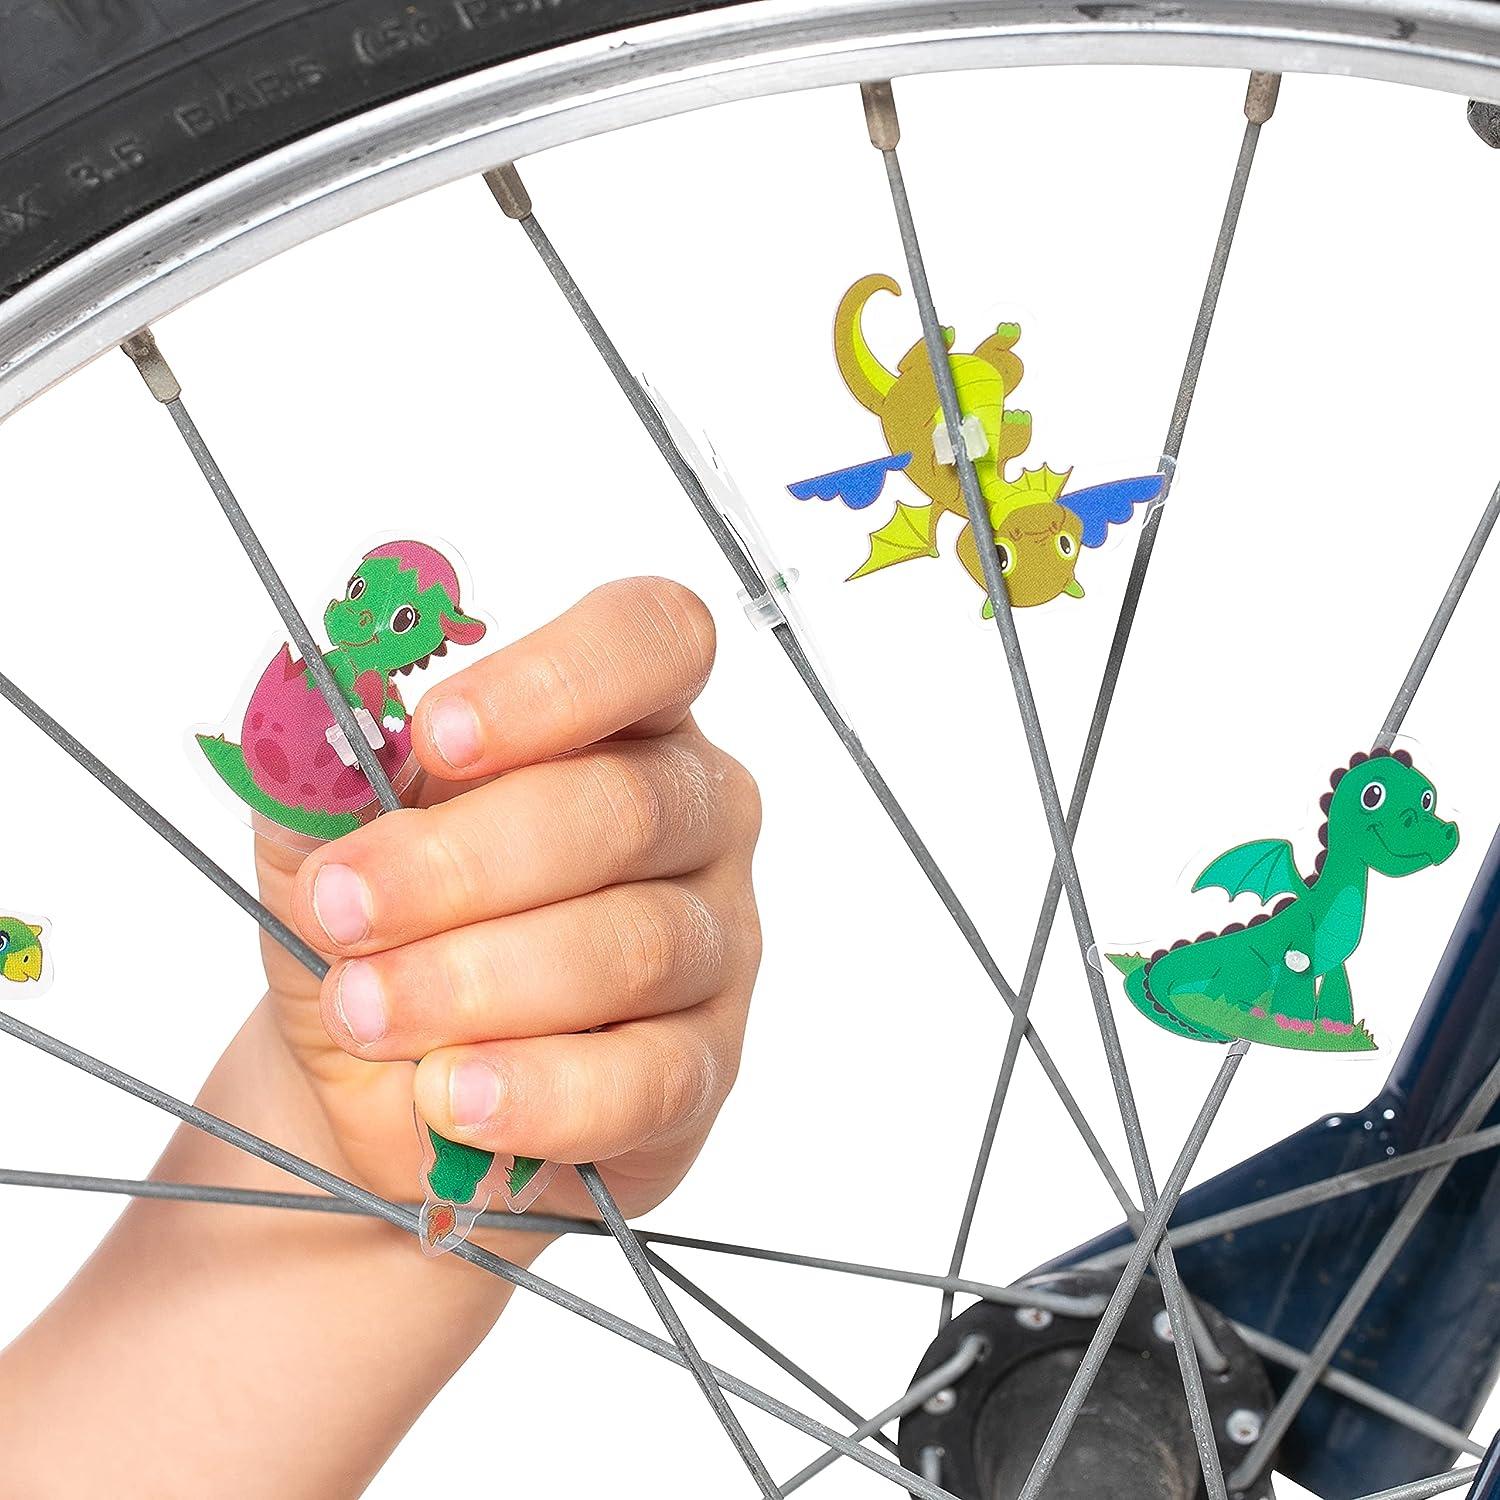 Bike Wheel Dinosaurs Spokes - 36 Kit - Cute Biking Accessories for Kids - Bicycle  Spokes Decorations - Cool Cycling Gear Gift for Boys - Spoke Beads  Attachments - Dinosaurs Easter Egg Stuffers